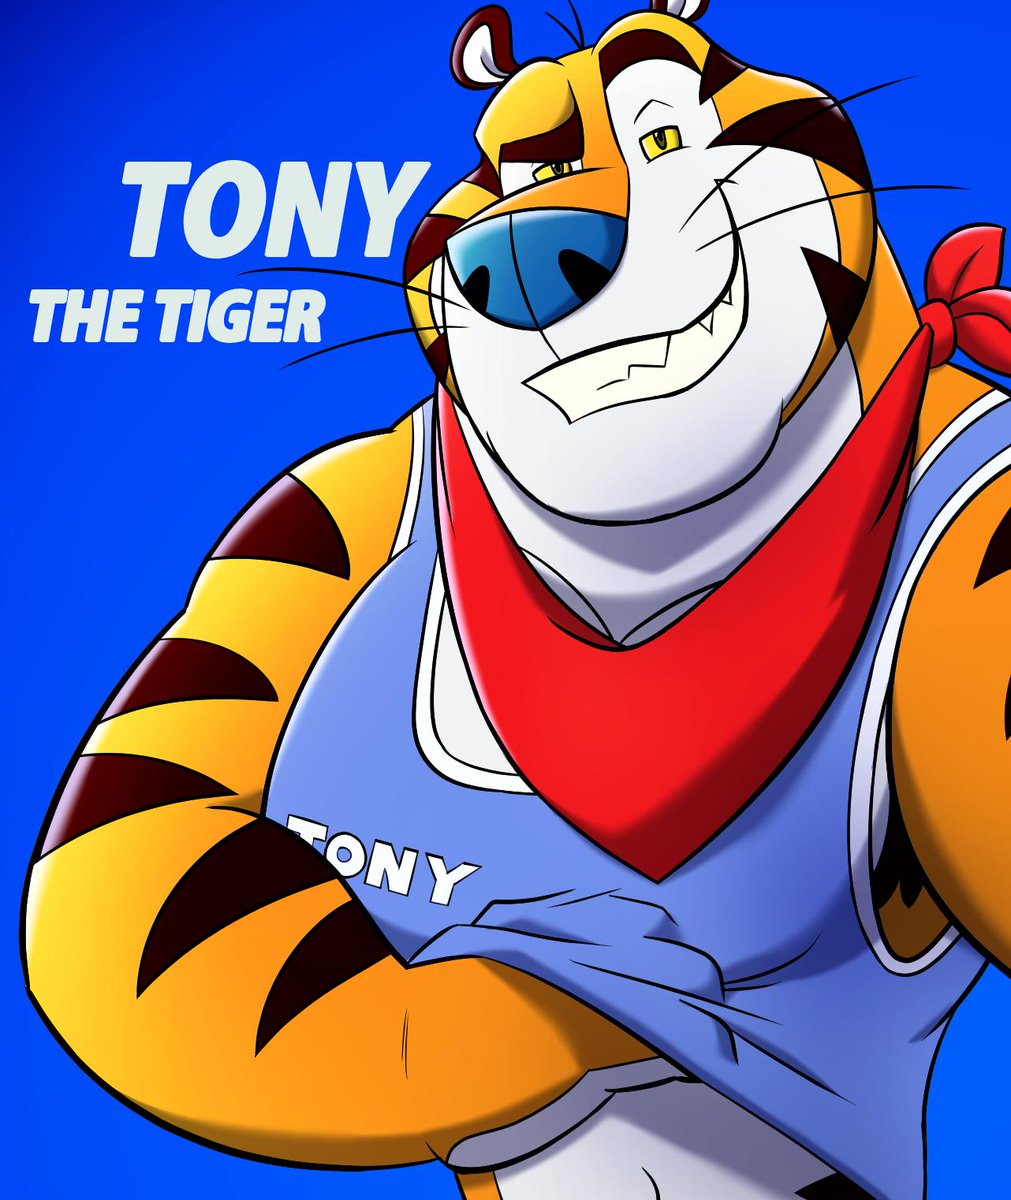 Tony the Tiger was voted as the winner of the Cat poll and will be availabl...